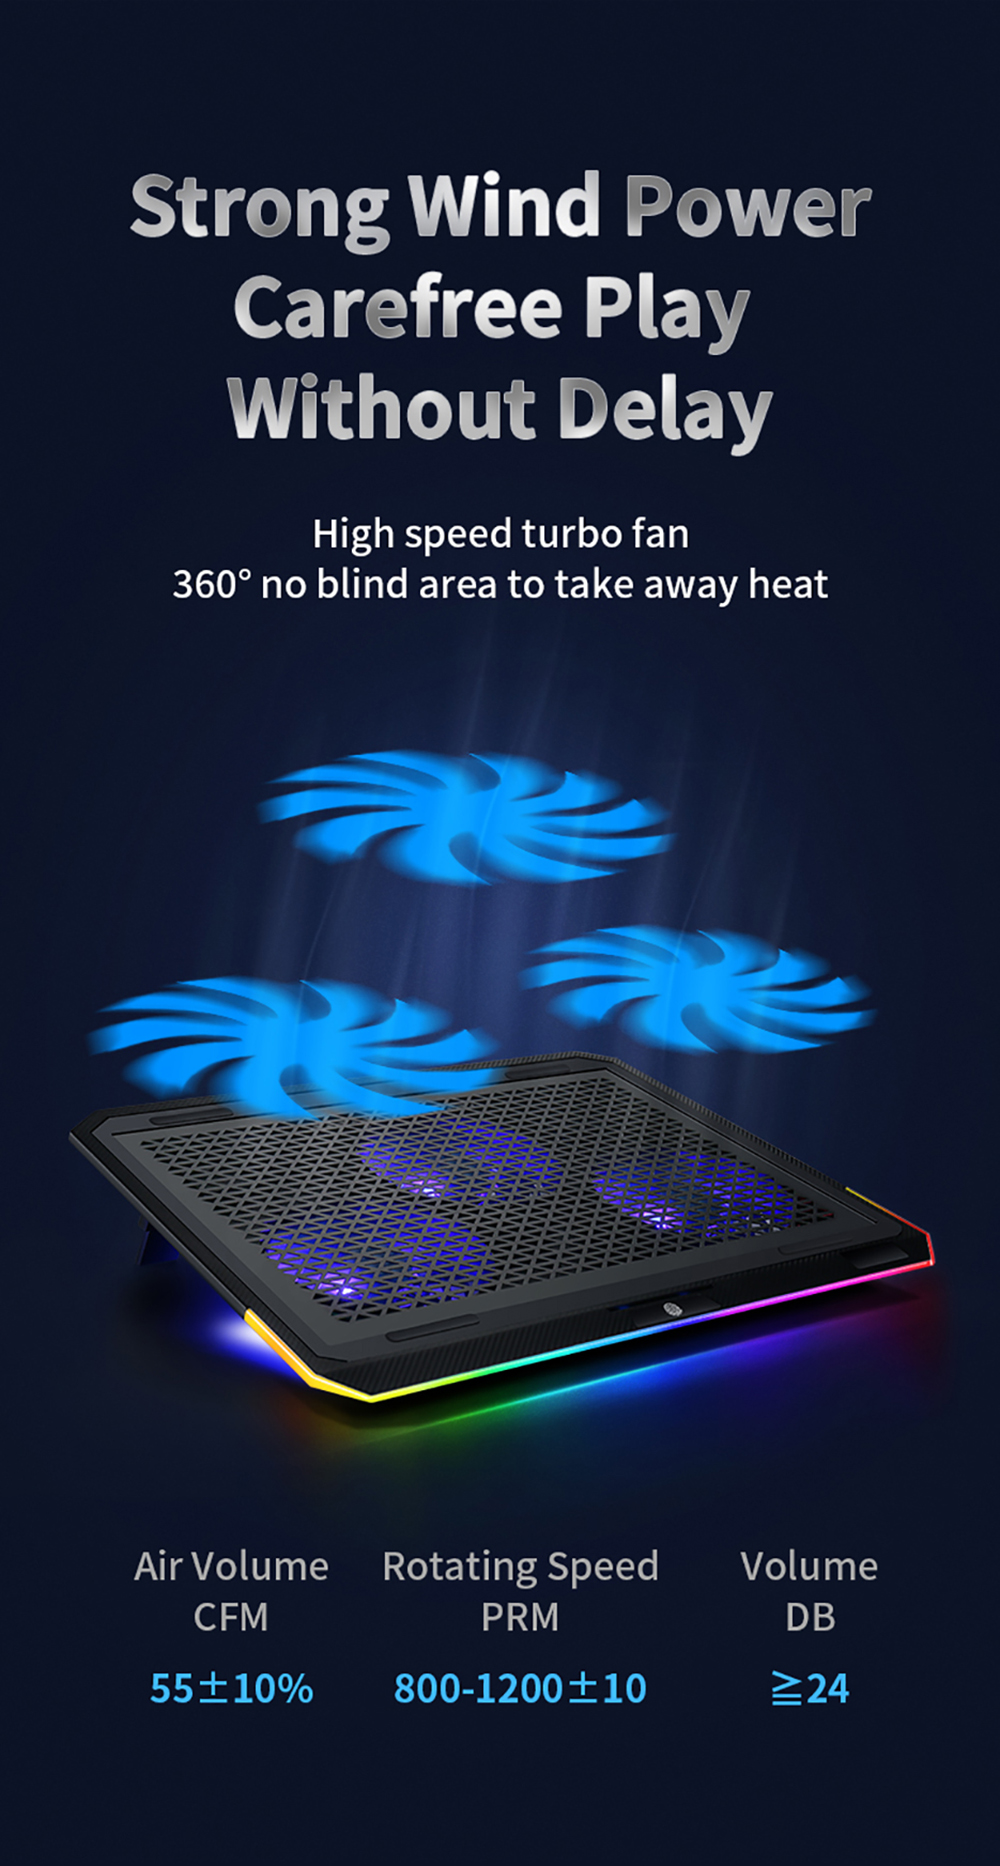 LLANO Laptop Cooling Pad Laptop Radiator Cooler Stand with 3 Cooling Fans 2 USB Ports Adjustable Height RGB Touch Control Q8 for 14-17 inches Laptop